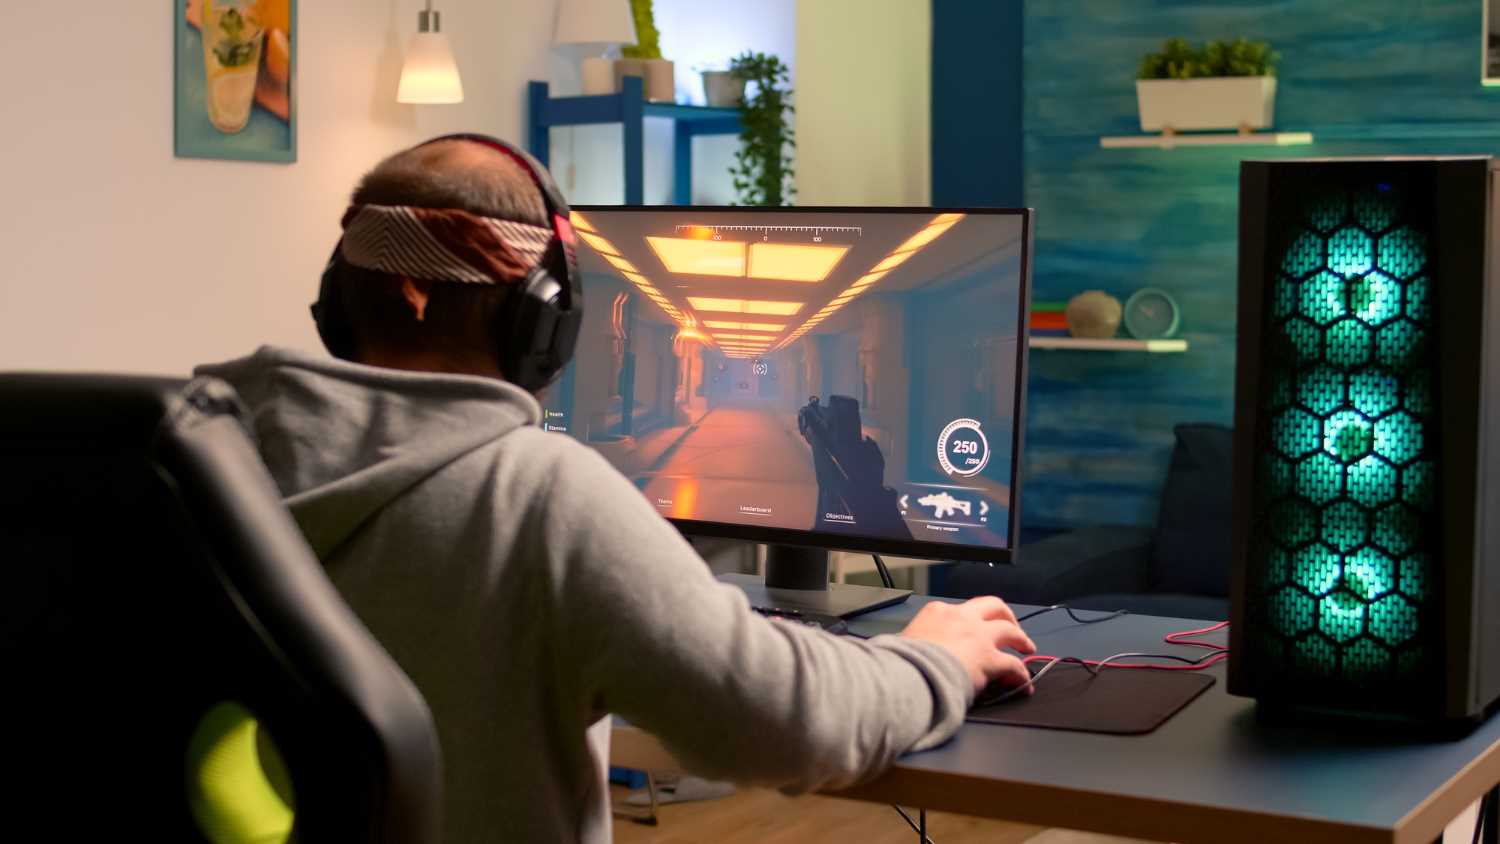 Guide to Building Your Perfect Gaming Setup at Home < Tech Takes -   India